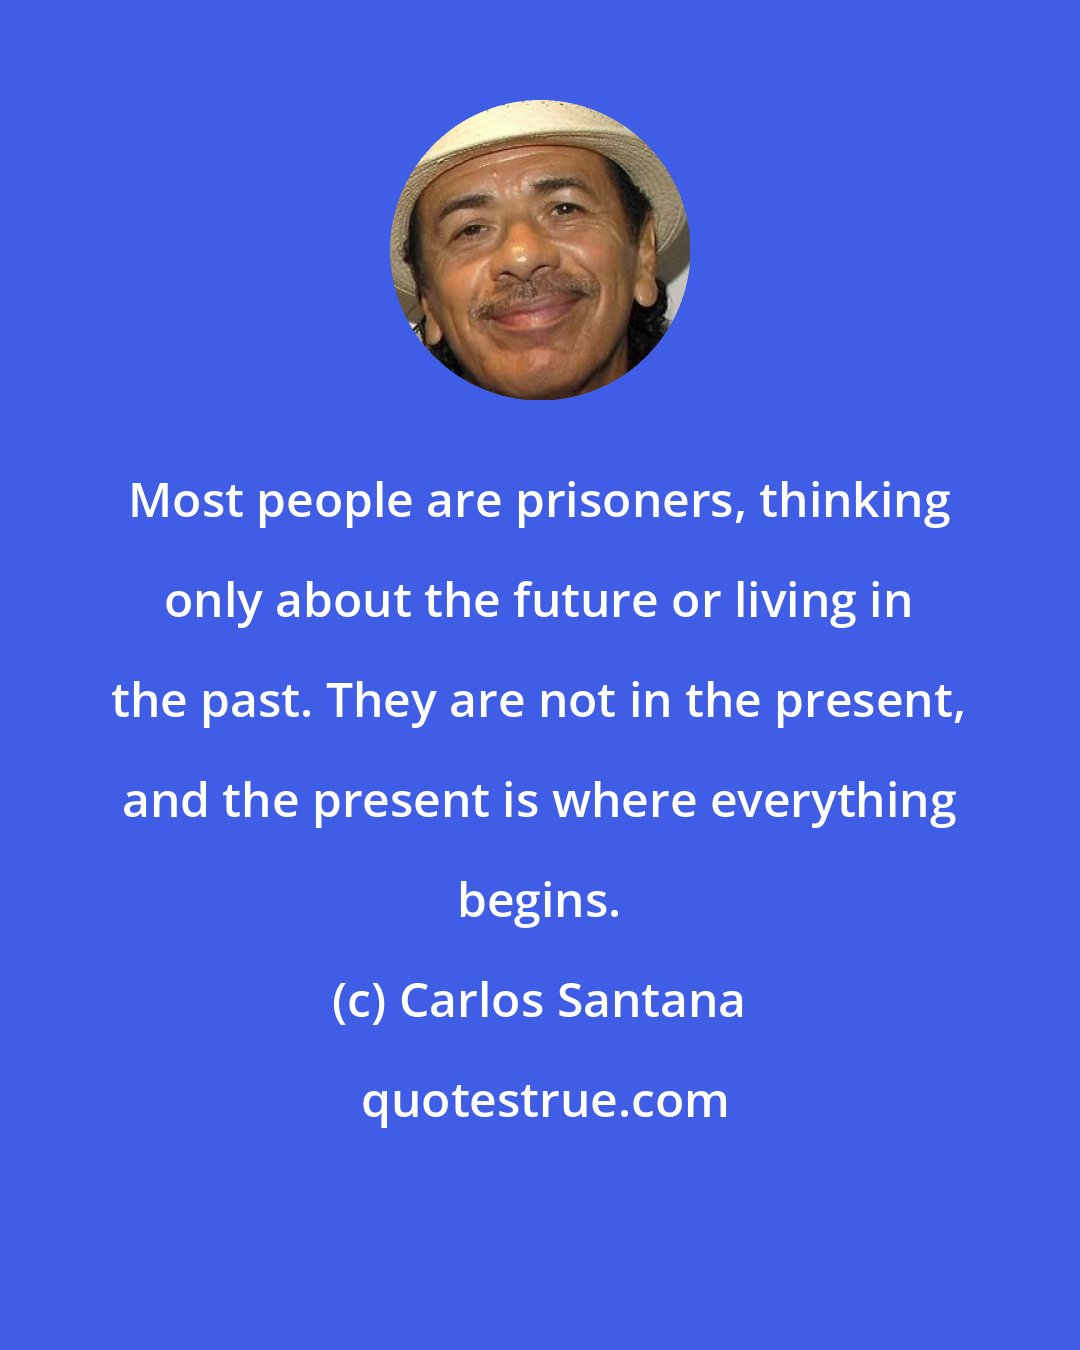 Carlos Santana: Most people are prisoners, thinking only about the future or living in the past. They are not in the present, and the present is where everything begins.